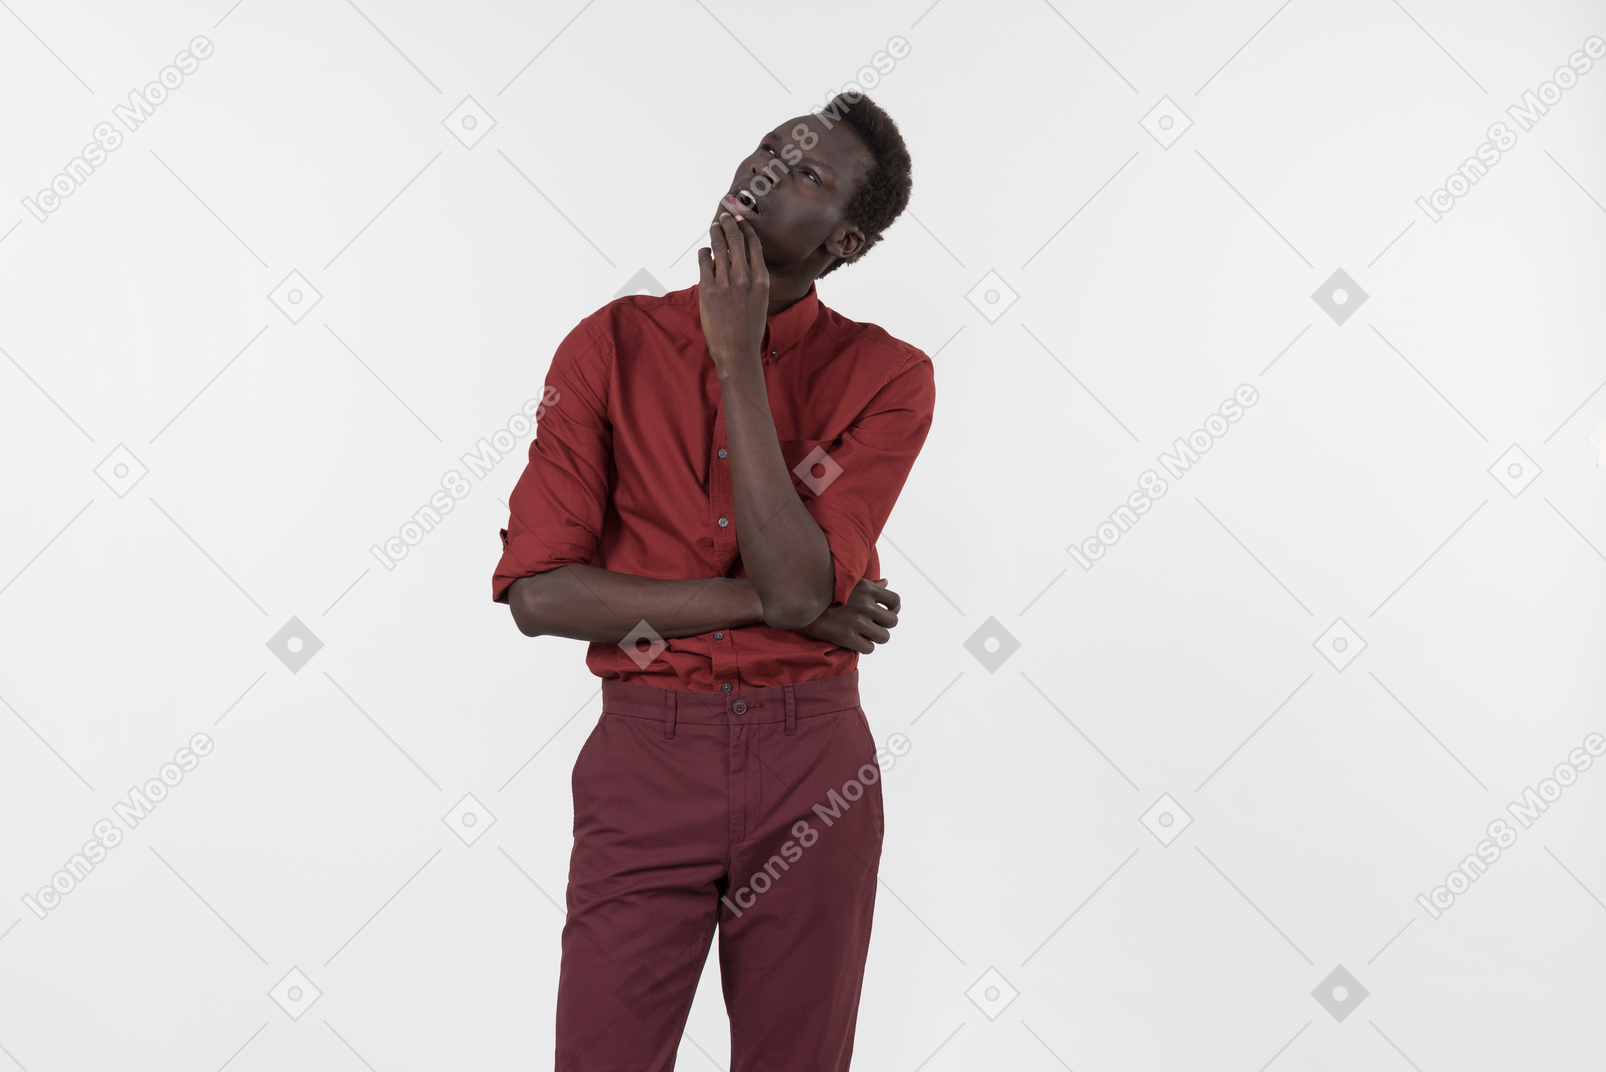 A young black man in a red shirt with rolled up sleeves and dark red pants standing alone on the white background